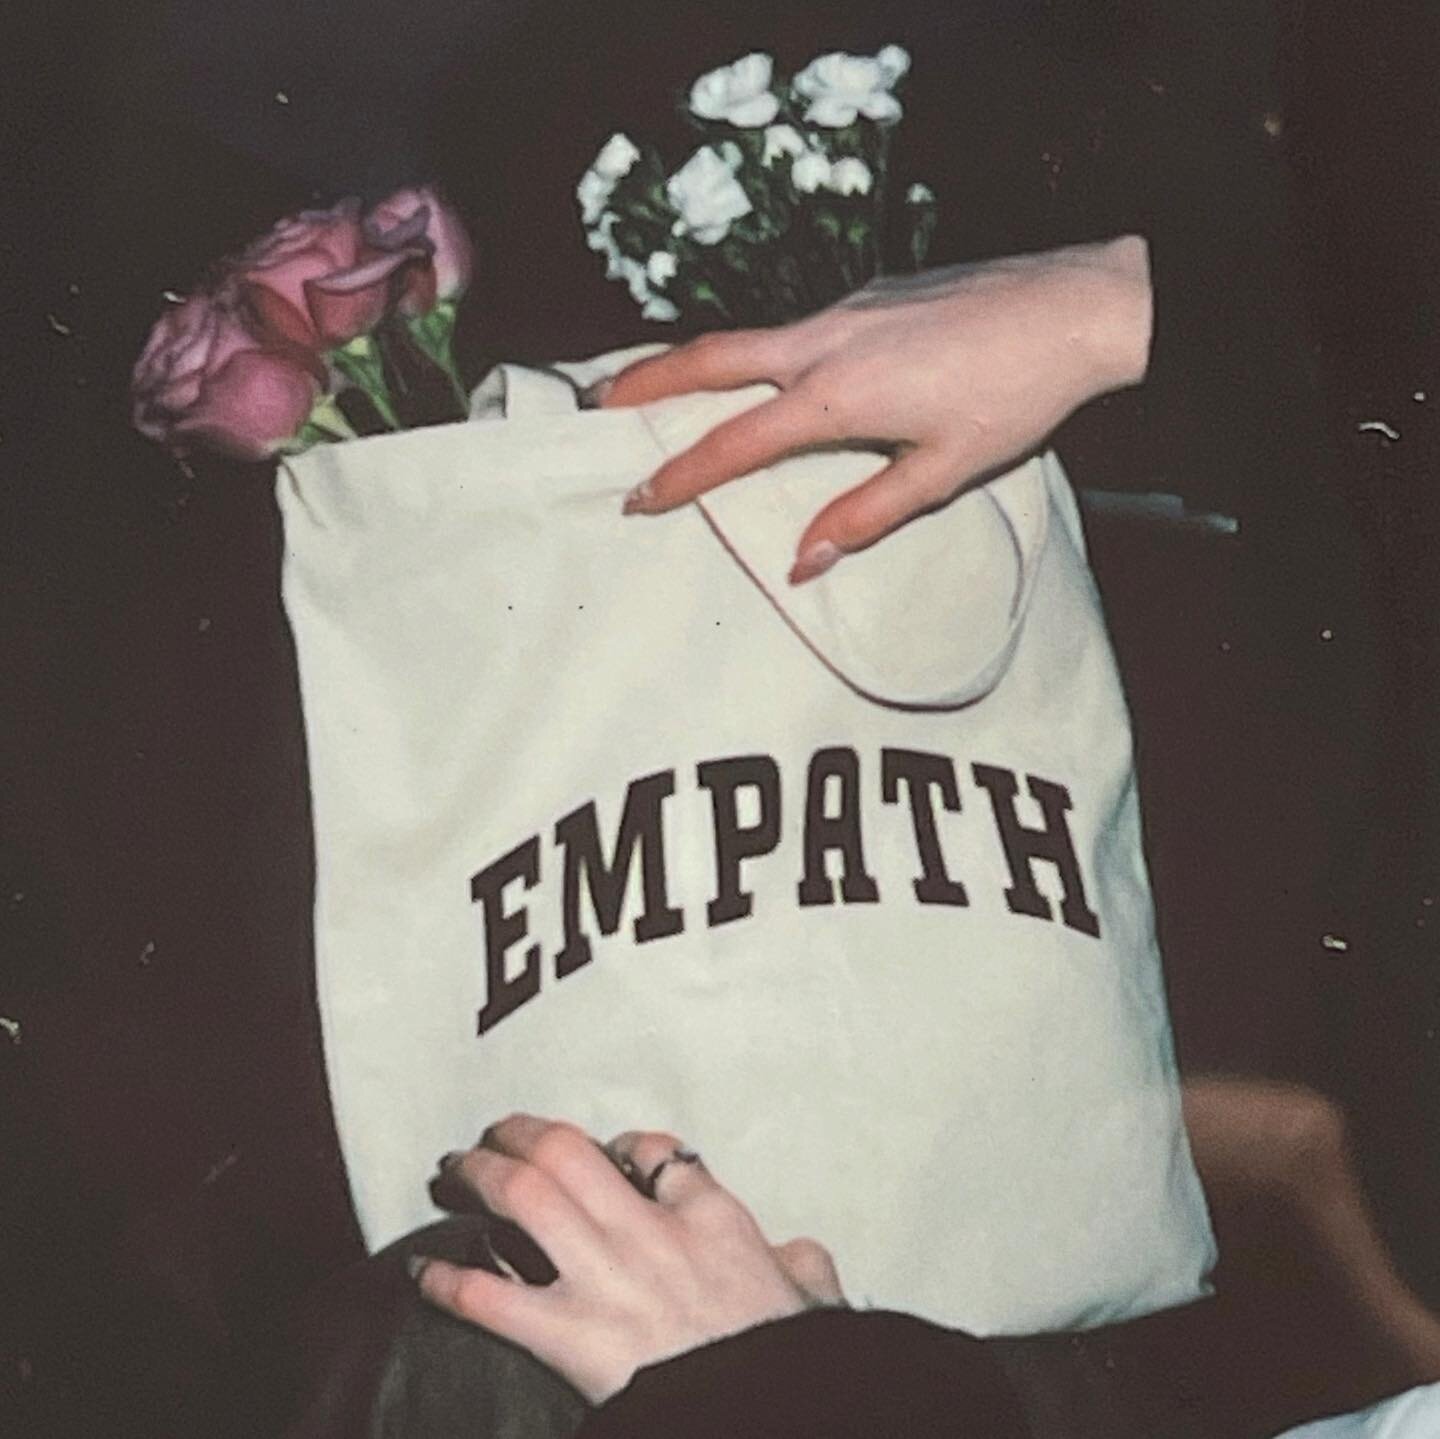 &ldquo;Me, An Empath&rdquo; TOTE OUT NOW! 14&rdquo; x 14&rdquo; durable canvas with velvety-soft lettering. Link in bio! 💌 #smallbusiness #empath #sensitive #supersensitive #shopcanadian #shopsmall #canvastote #totebagmfs #indie #mentalhealth #menta